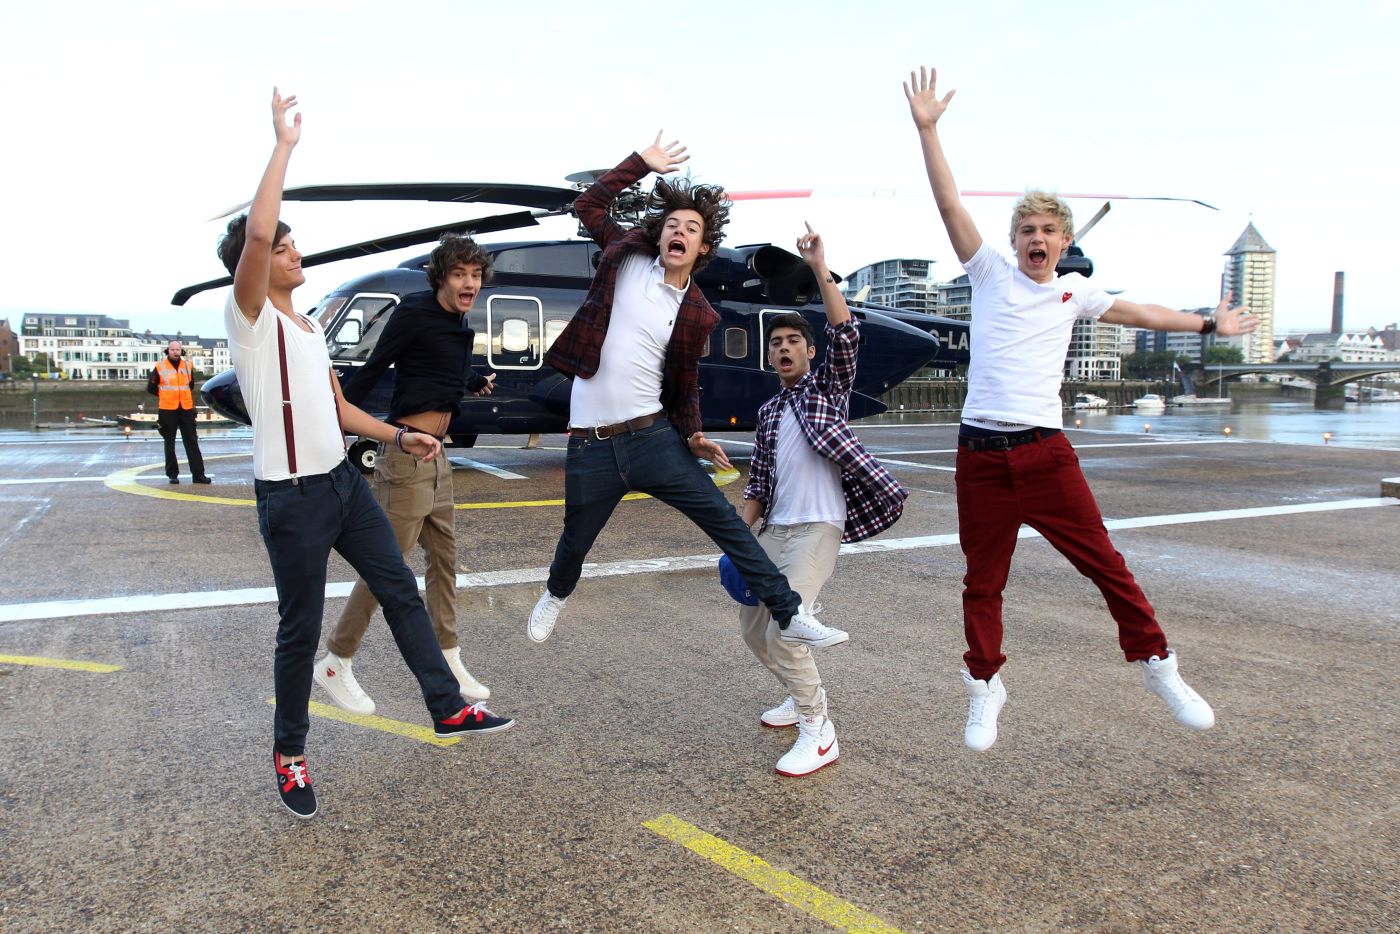 All five One Direction band members jumping in the air in front of a helicopter in various poses.